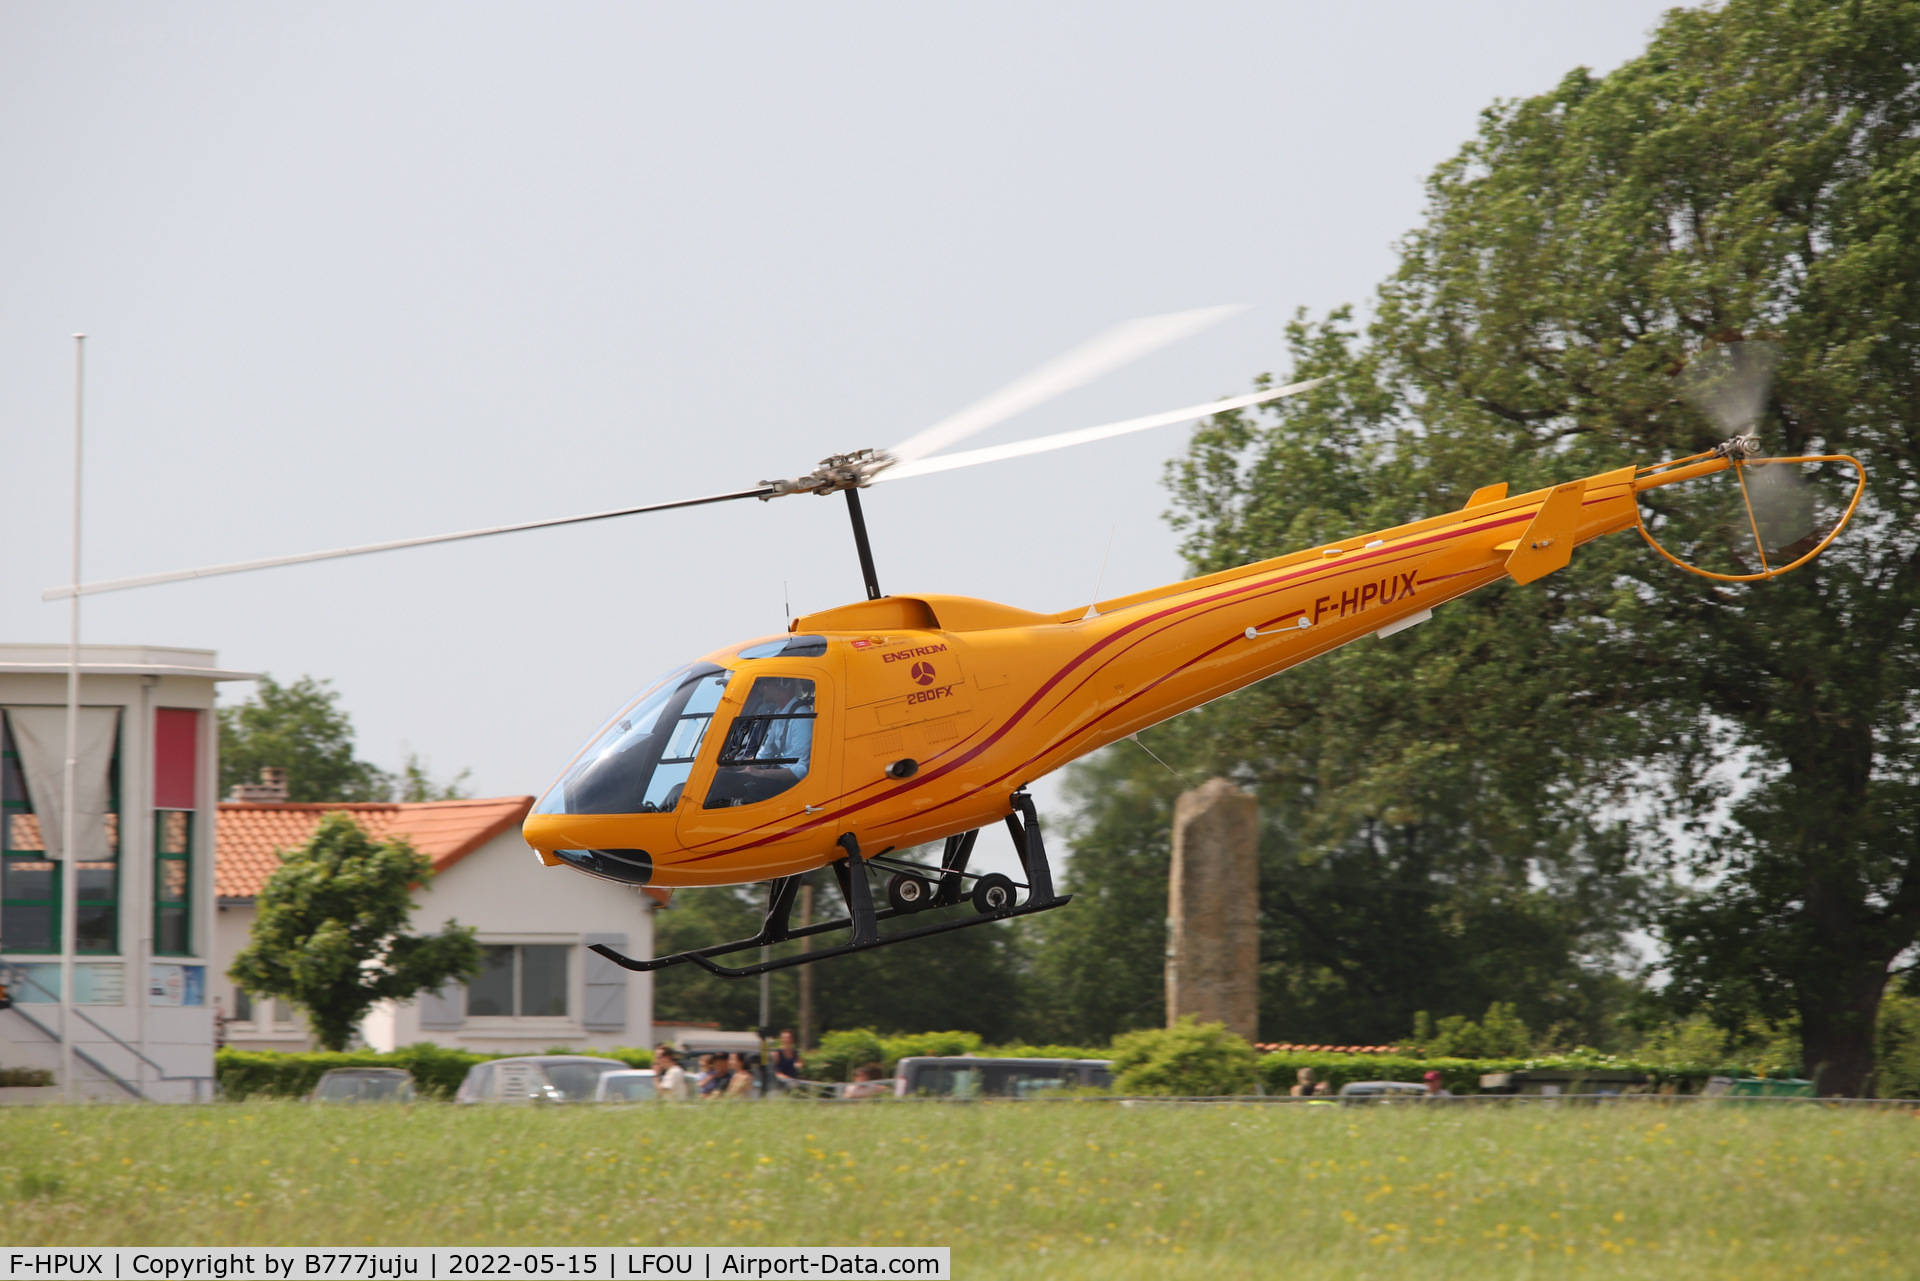 F-HPUX, 2019 Enstrom 280FX Shark Shark C/N 2167, at Helico 2022 Cholet